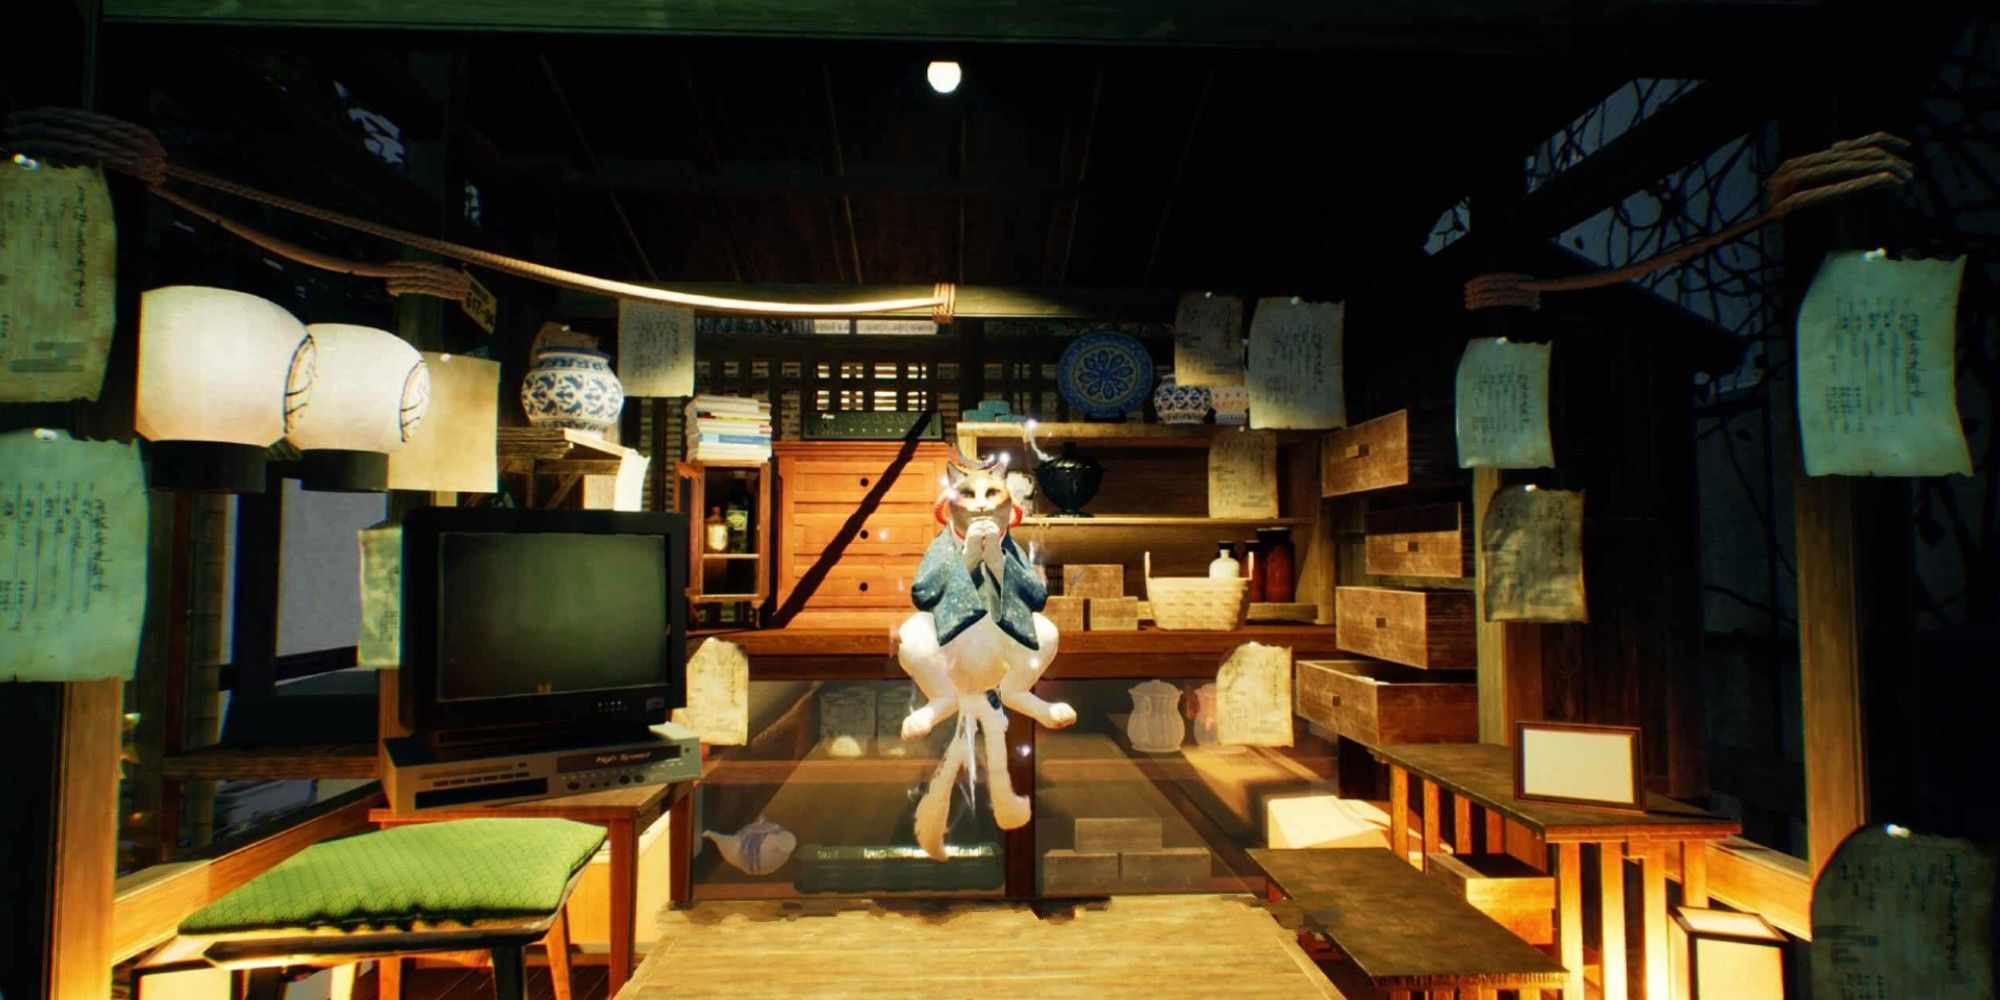 Sit inside the occult nekomata shop and happily wait for your lost ghost trinkets.